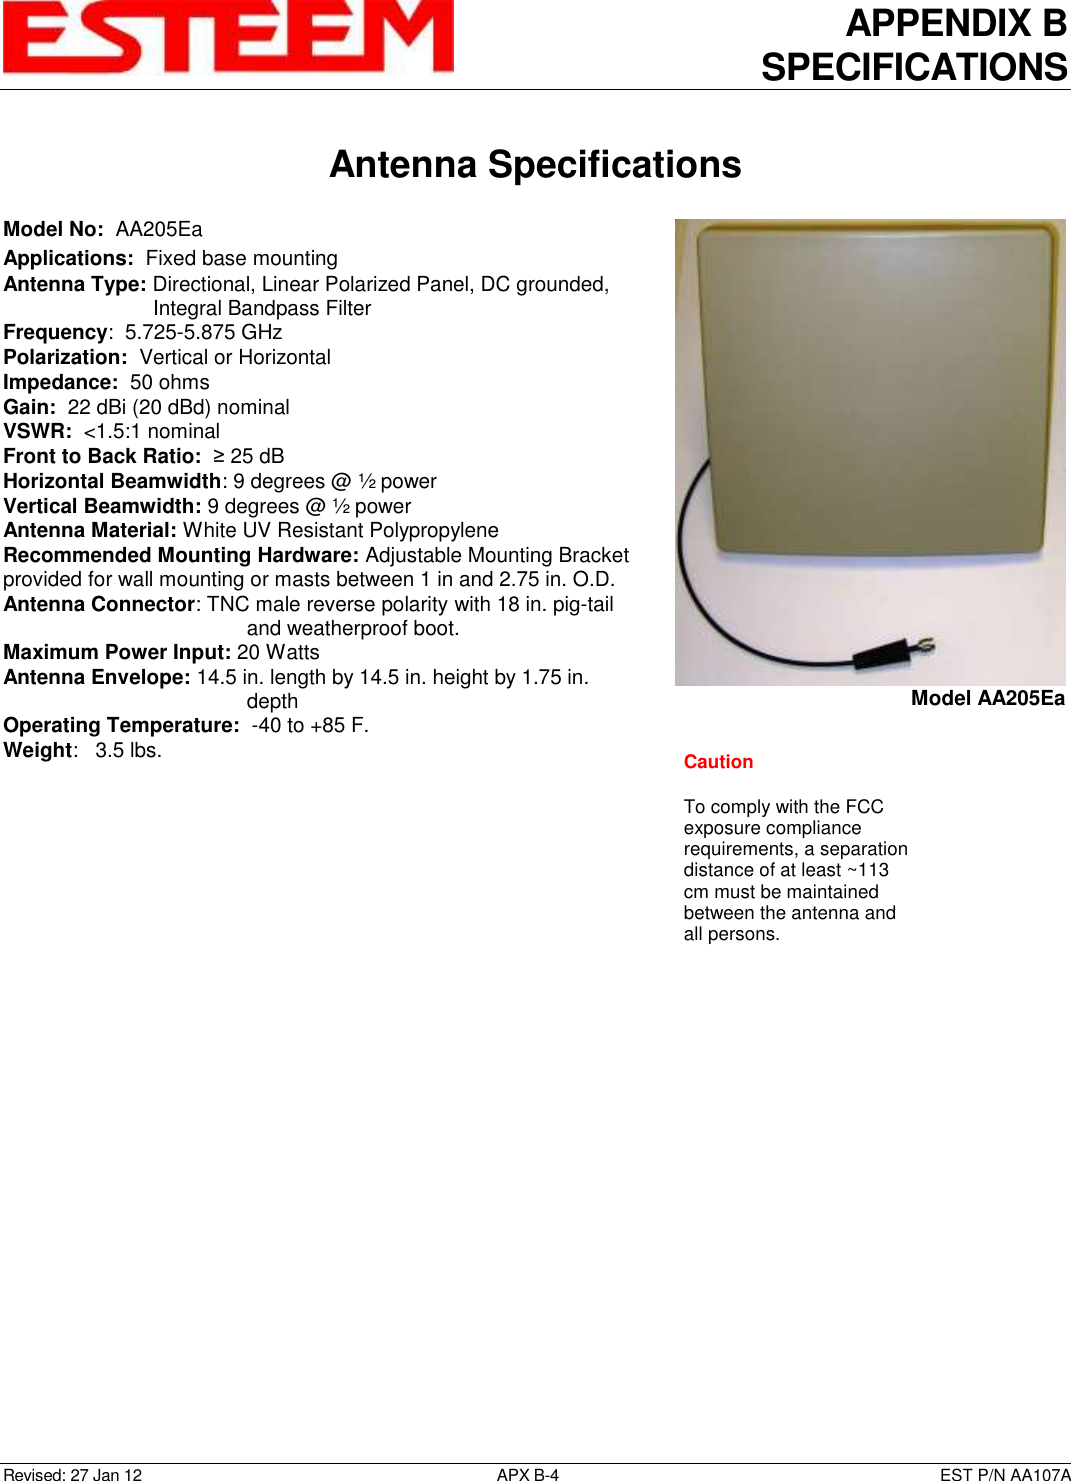 APPENDIX B SPECIFICATIONS   Antenna Specifications  Revised: 27 Jan 12  APX B-4  EST P/N AA107A Model No:  AA205Ea Applications:  Fixed base mounting  Antenna Type: Directional, Linear Polarized Panel, DC grounded, Integral Bandpass Filter Frequency:  5.725-5.875 GHz Polarization:  Vertical or Horizontal Impedance:  50 ohms Gain:  22 dBi (20 dBd) nominal VSWR:  &lt;1.5:1 nominal  Front to Back Ratio:  ≥ 25 dB Horizontal Beamwidth: 9 degrees @ ½ power Vertical Beamwidth: 9 degrees @ ½ power Antenna Material: White UV Resistant Polypropylene Recommended Mounting Hardware: Adjustable Mounting Bracket provided for wall mounting or masts between 1 in and 2.75 in. O.D. Antenna Connector: TNC male reverse polarity with 18 in. pig-tail and weatherproof boot. Maximum Power Input: 20 Watts Antenna Envelope: 14.5 in. length by 14.5 in. height by 1.75 in. depth Operating Temperature:  -40 to +85 F. Weight:   3.5 lbs.         Model AA205Ea Caution  To comply with the FCC exposure compliance requirements, a separation distance of at least ~113 cm must be maintained between the antenna and all persons.  